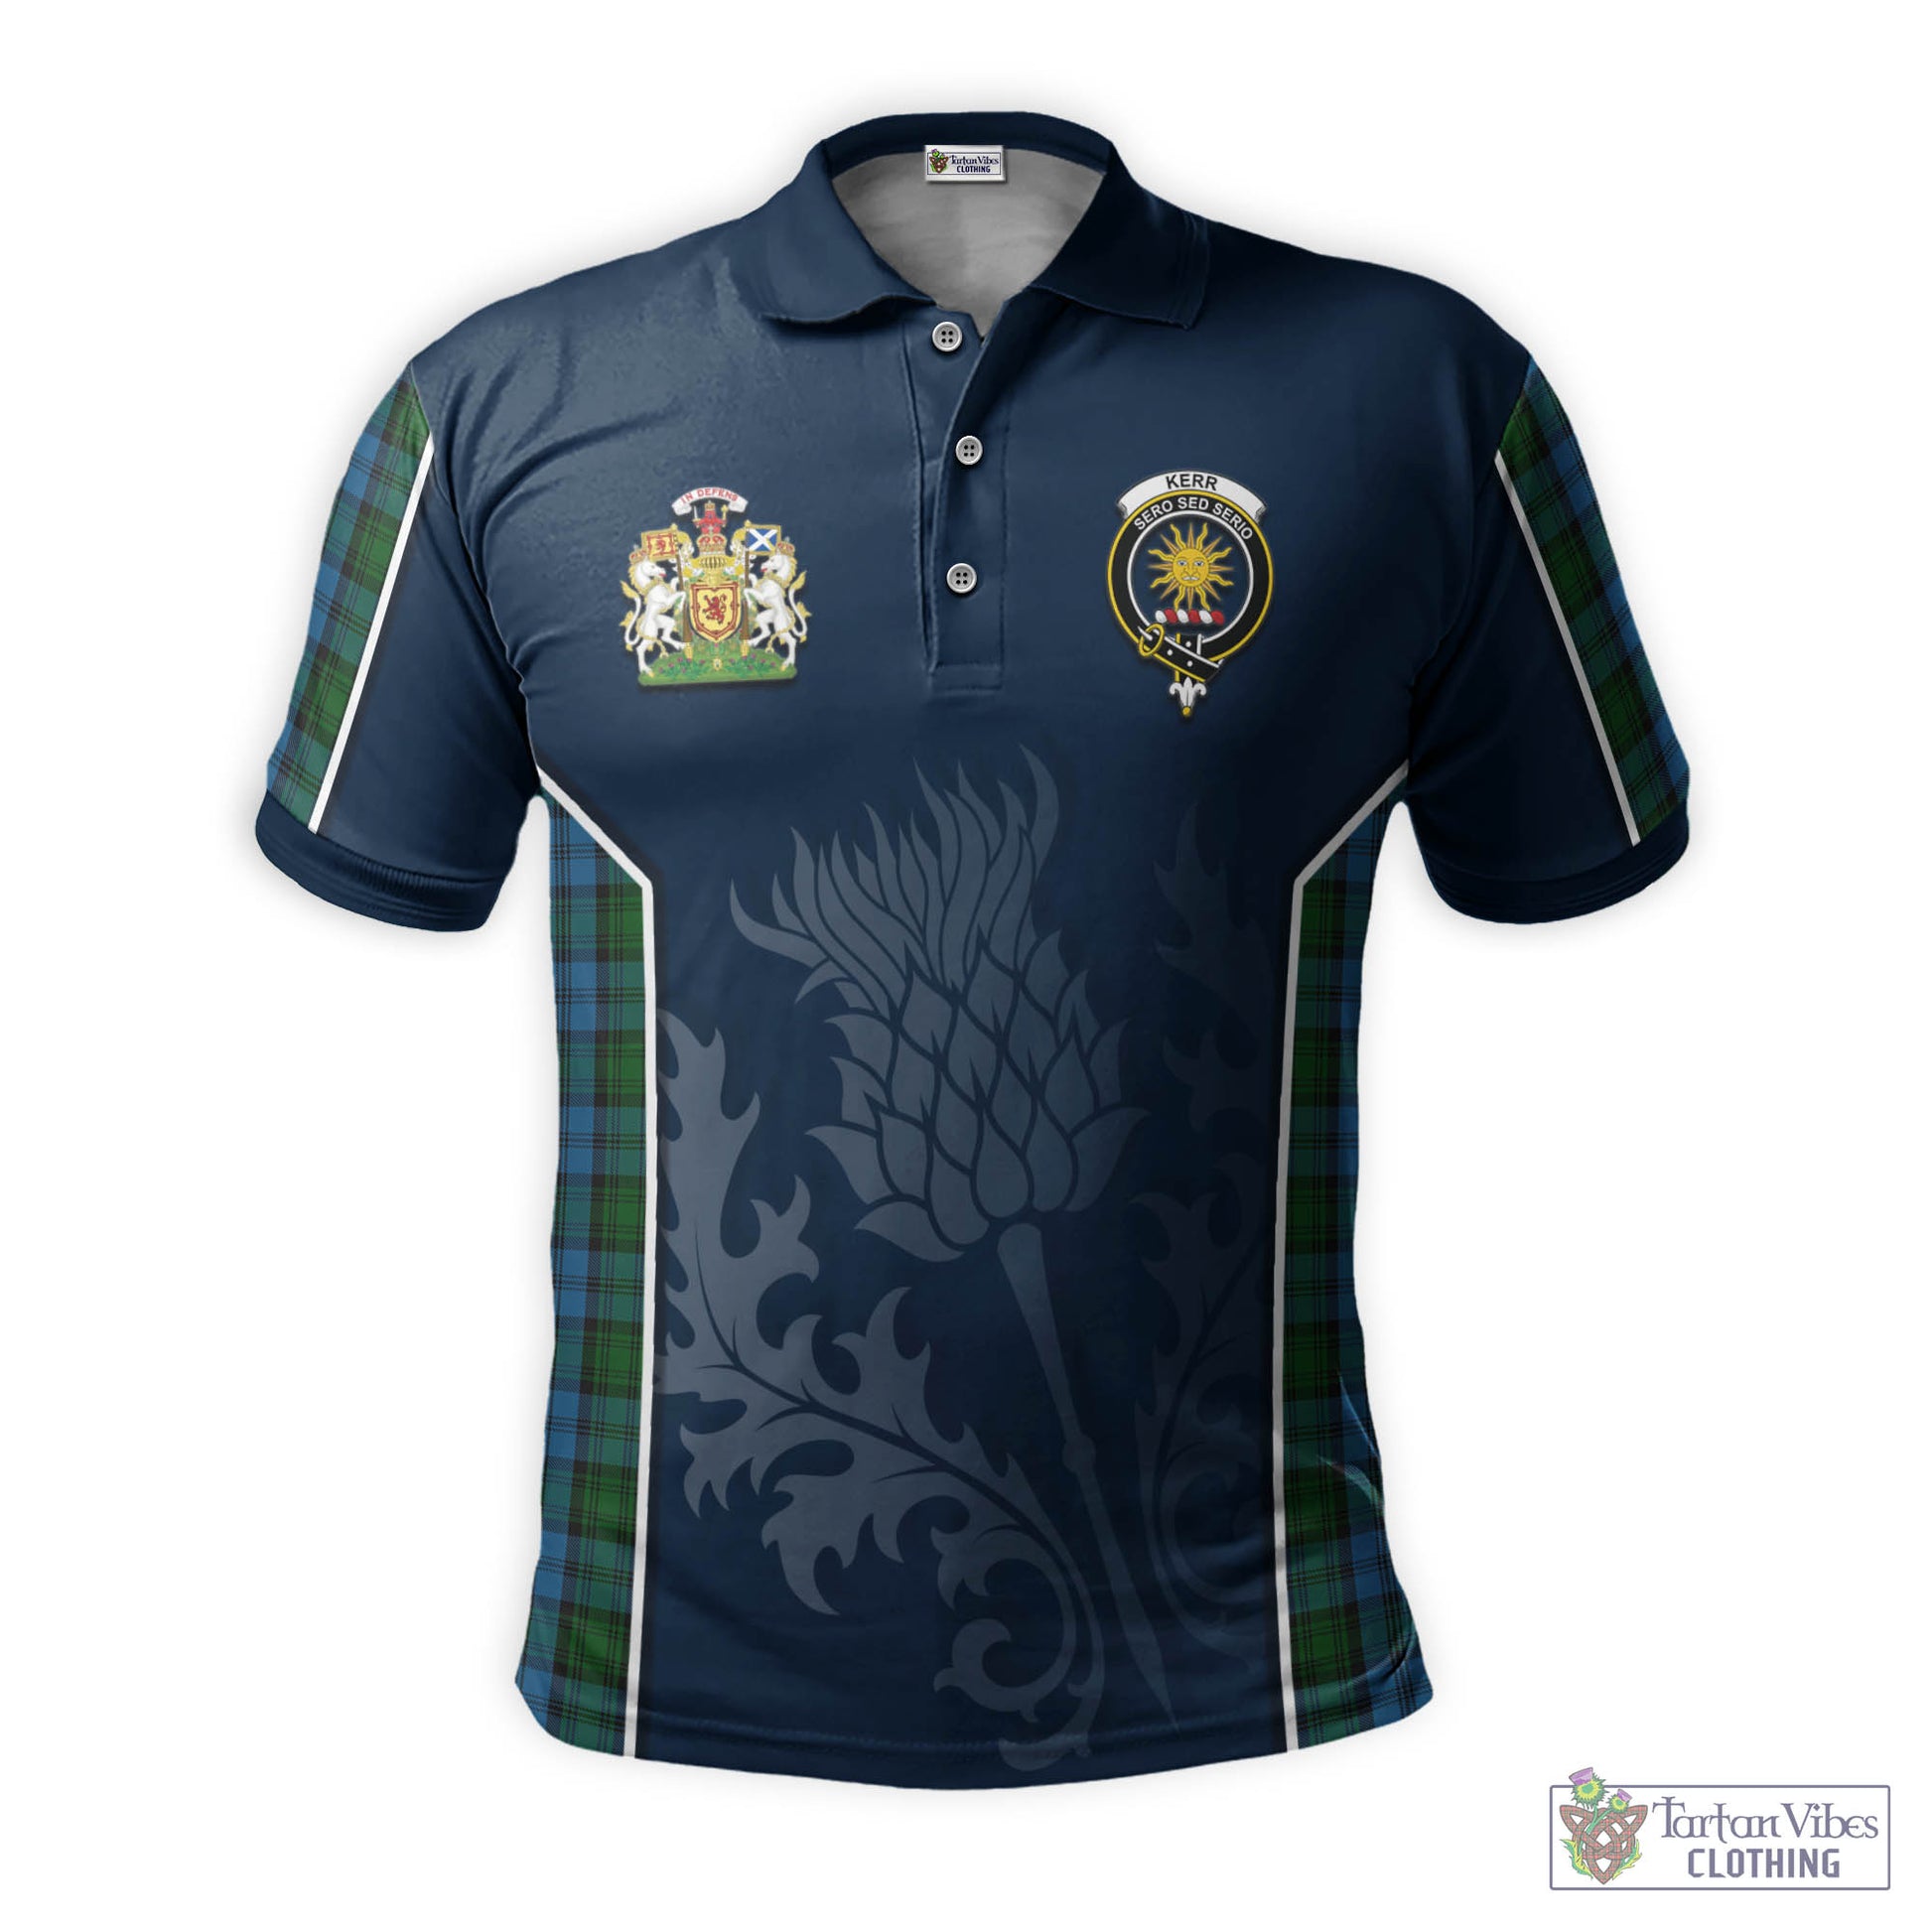 Tartan Vibes Clothing Kerr Hunting Tartan Men's Polo Shirt with Family Crest and Scottish Thistle Vibes Sport Style